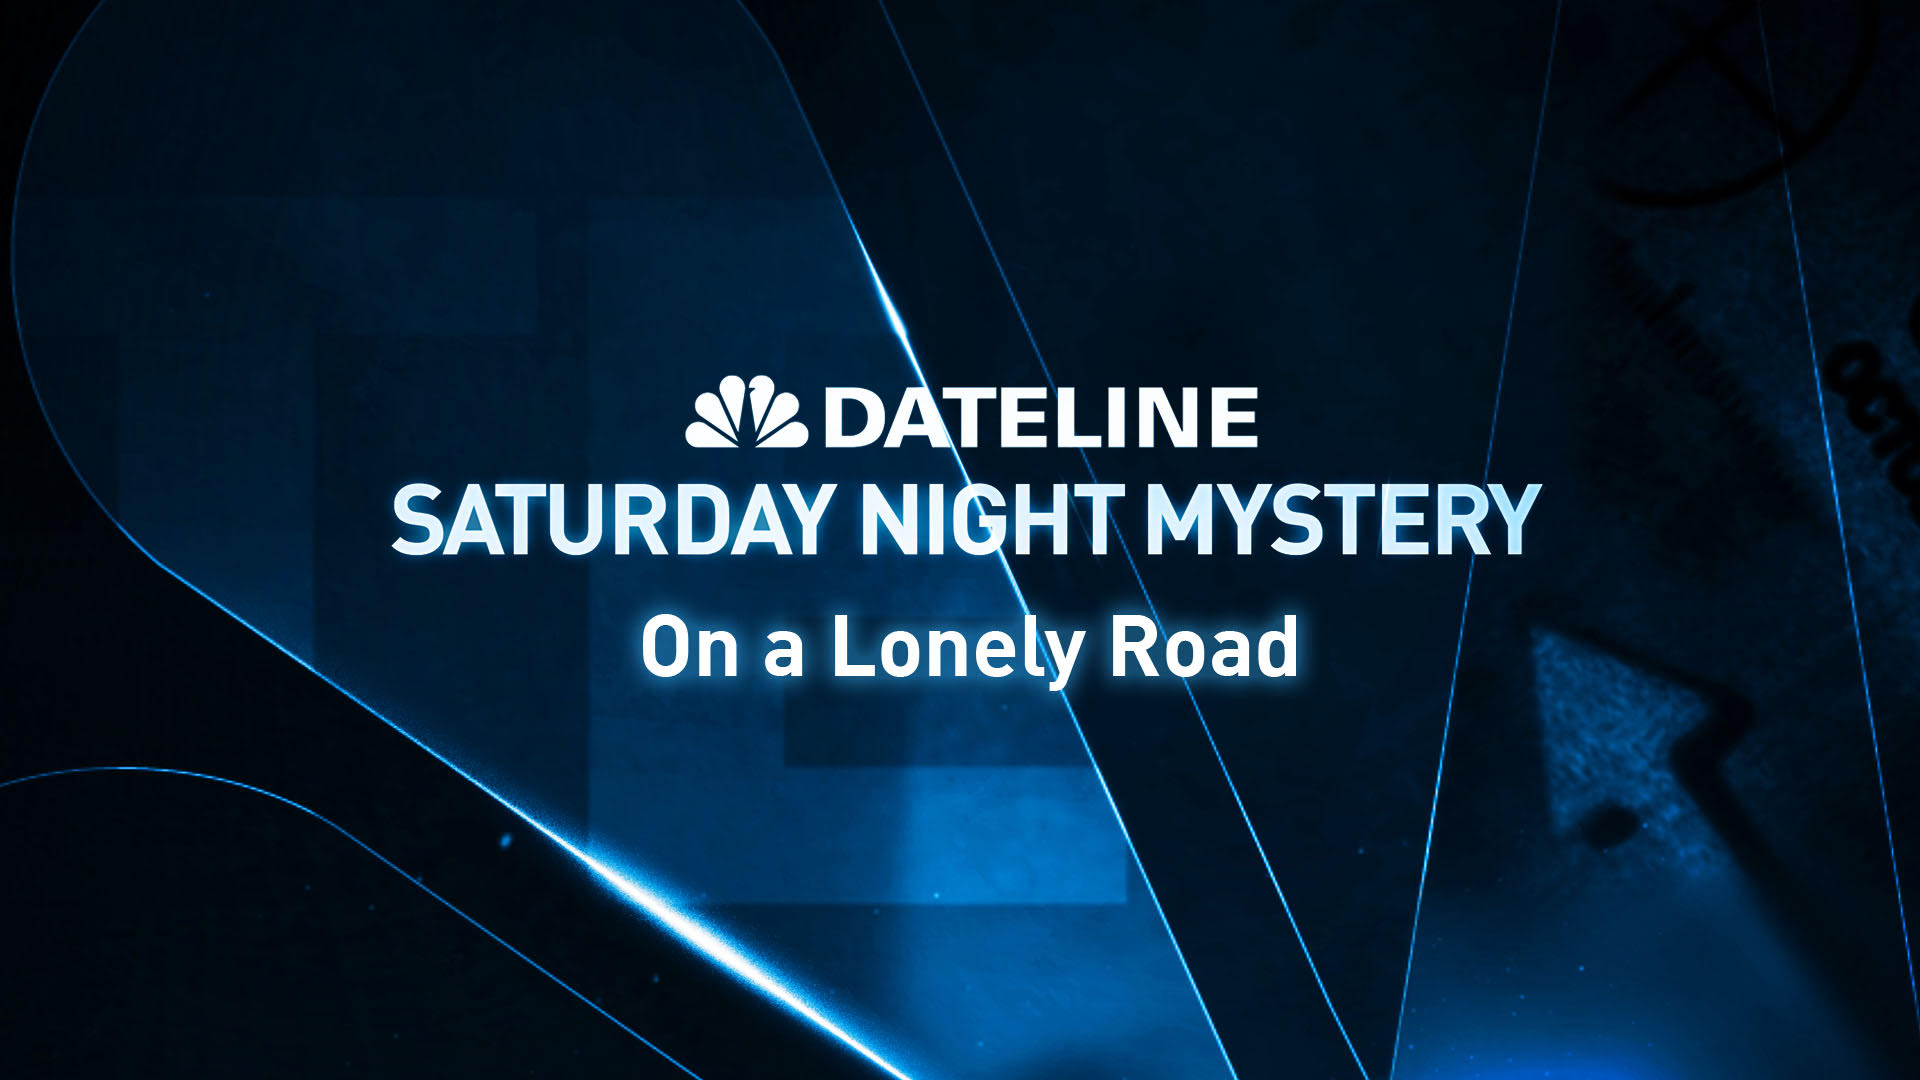 Watch On a Lonely Road (Season 2017, Episode 715) of Dateline or get episod...